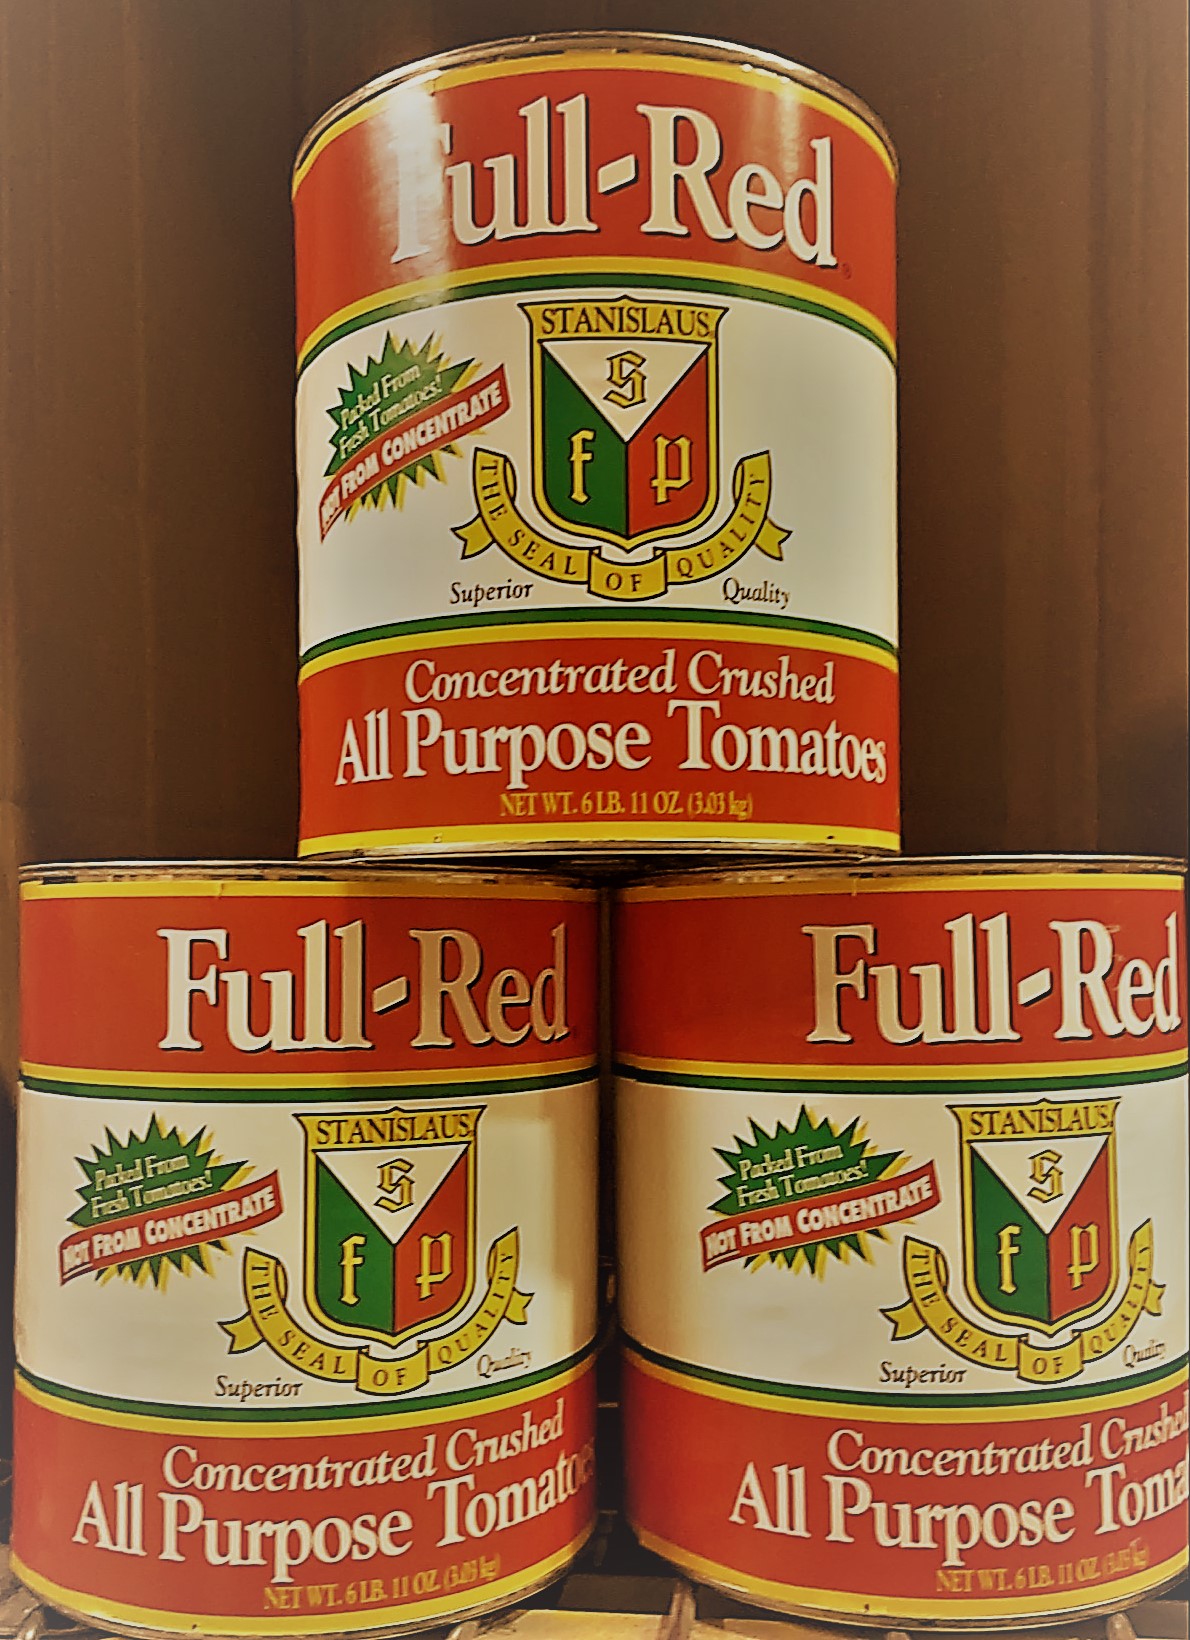 Stanislaus - Full-Red Crushed Tomatoes 6/#10